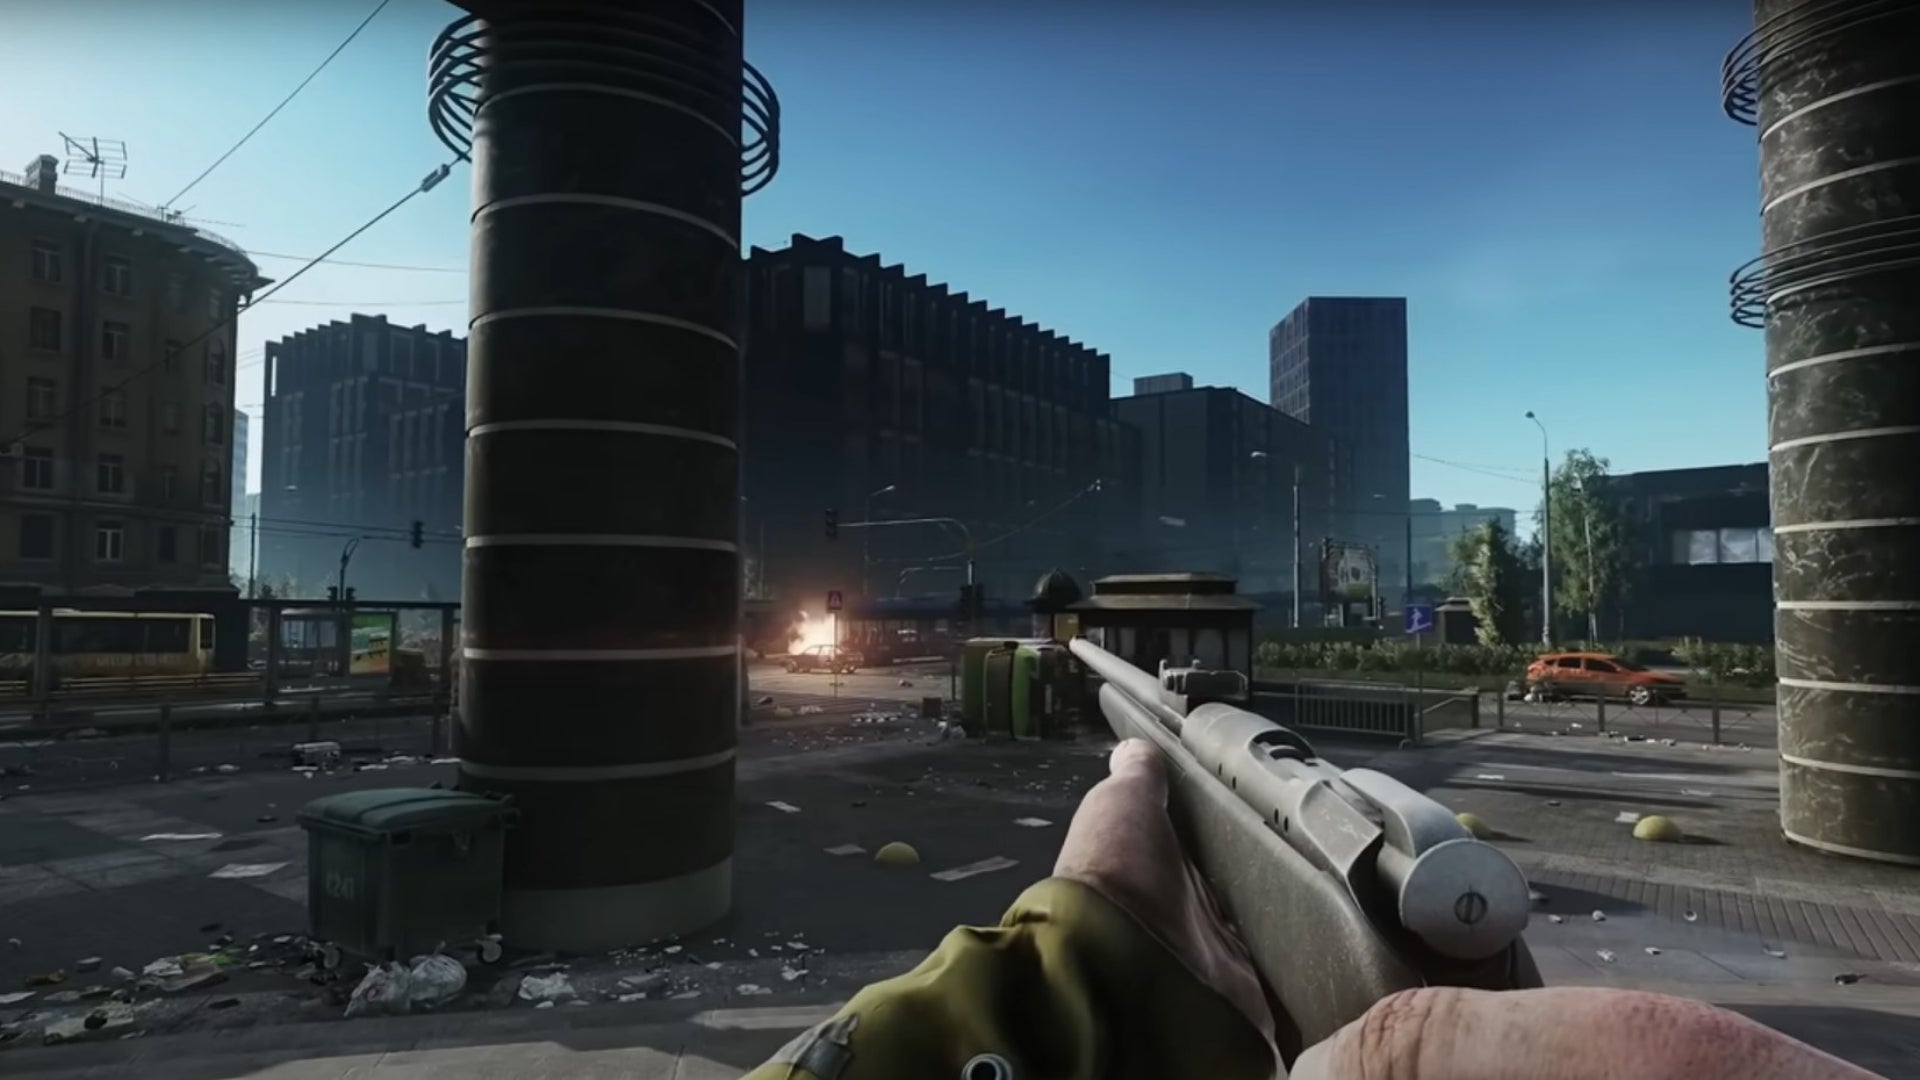 Escape from Tarkov has revealed its new map ahead of todays wipe VG247